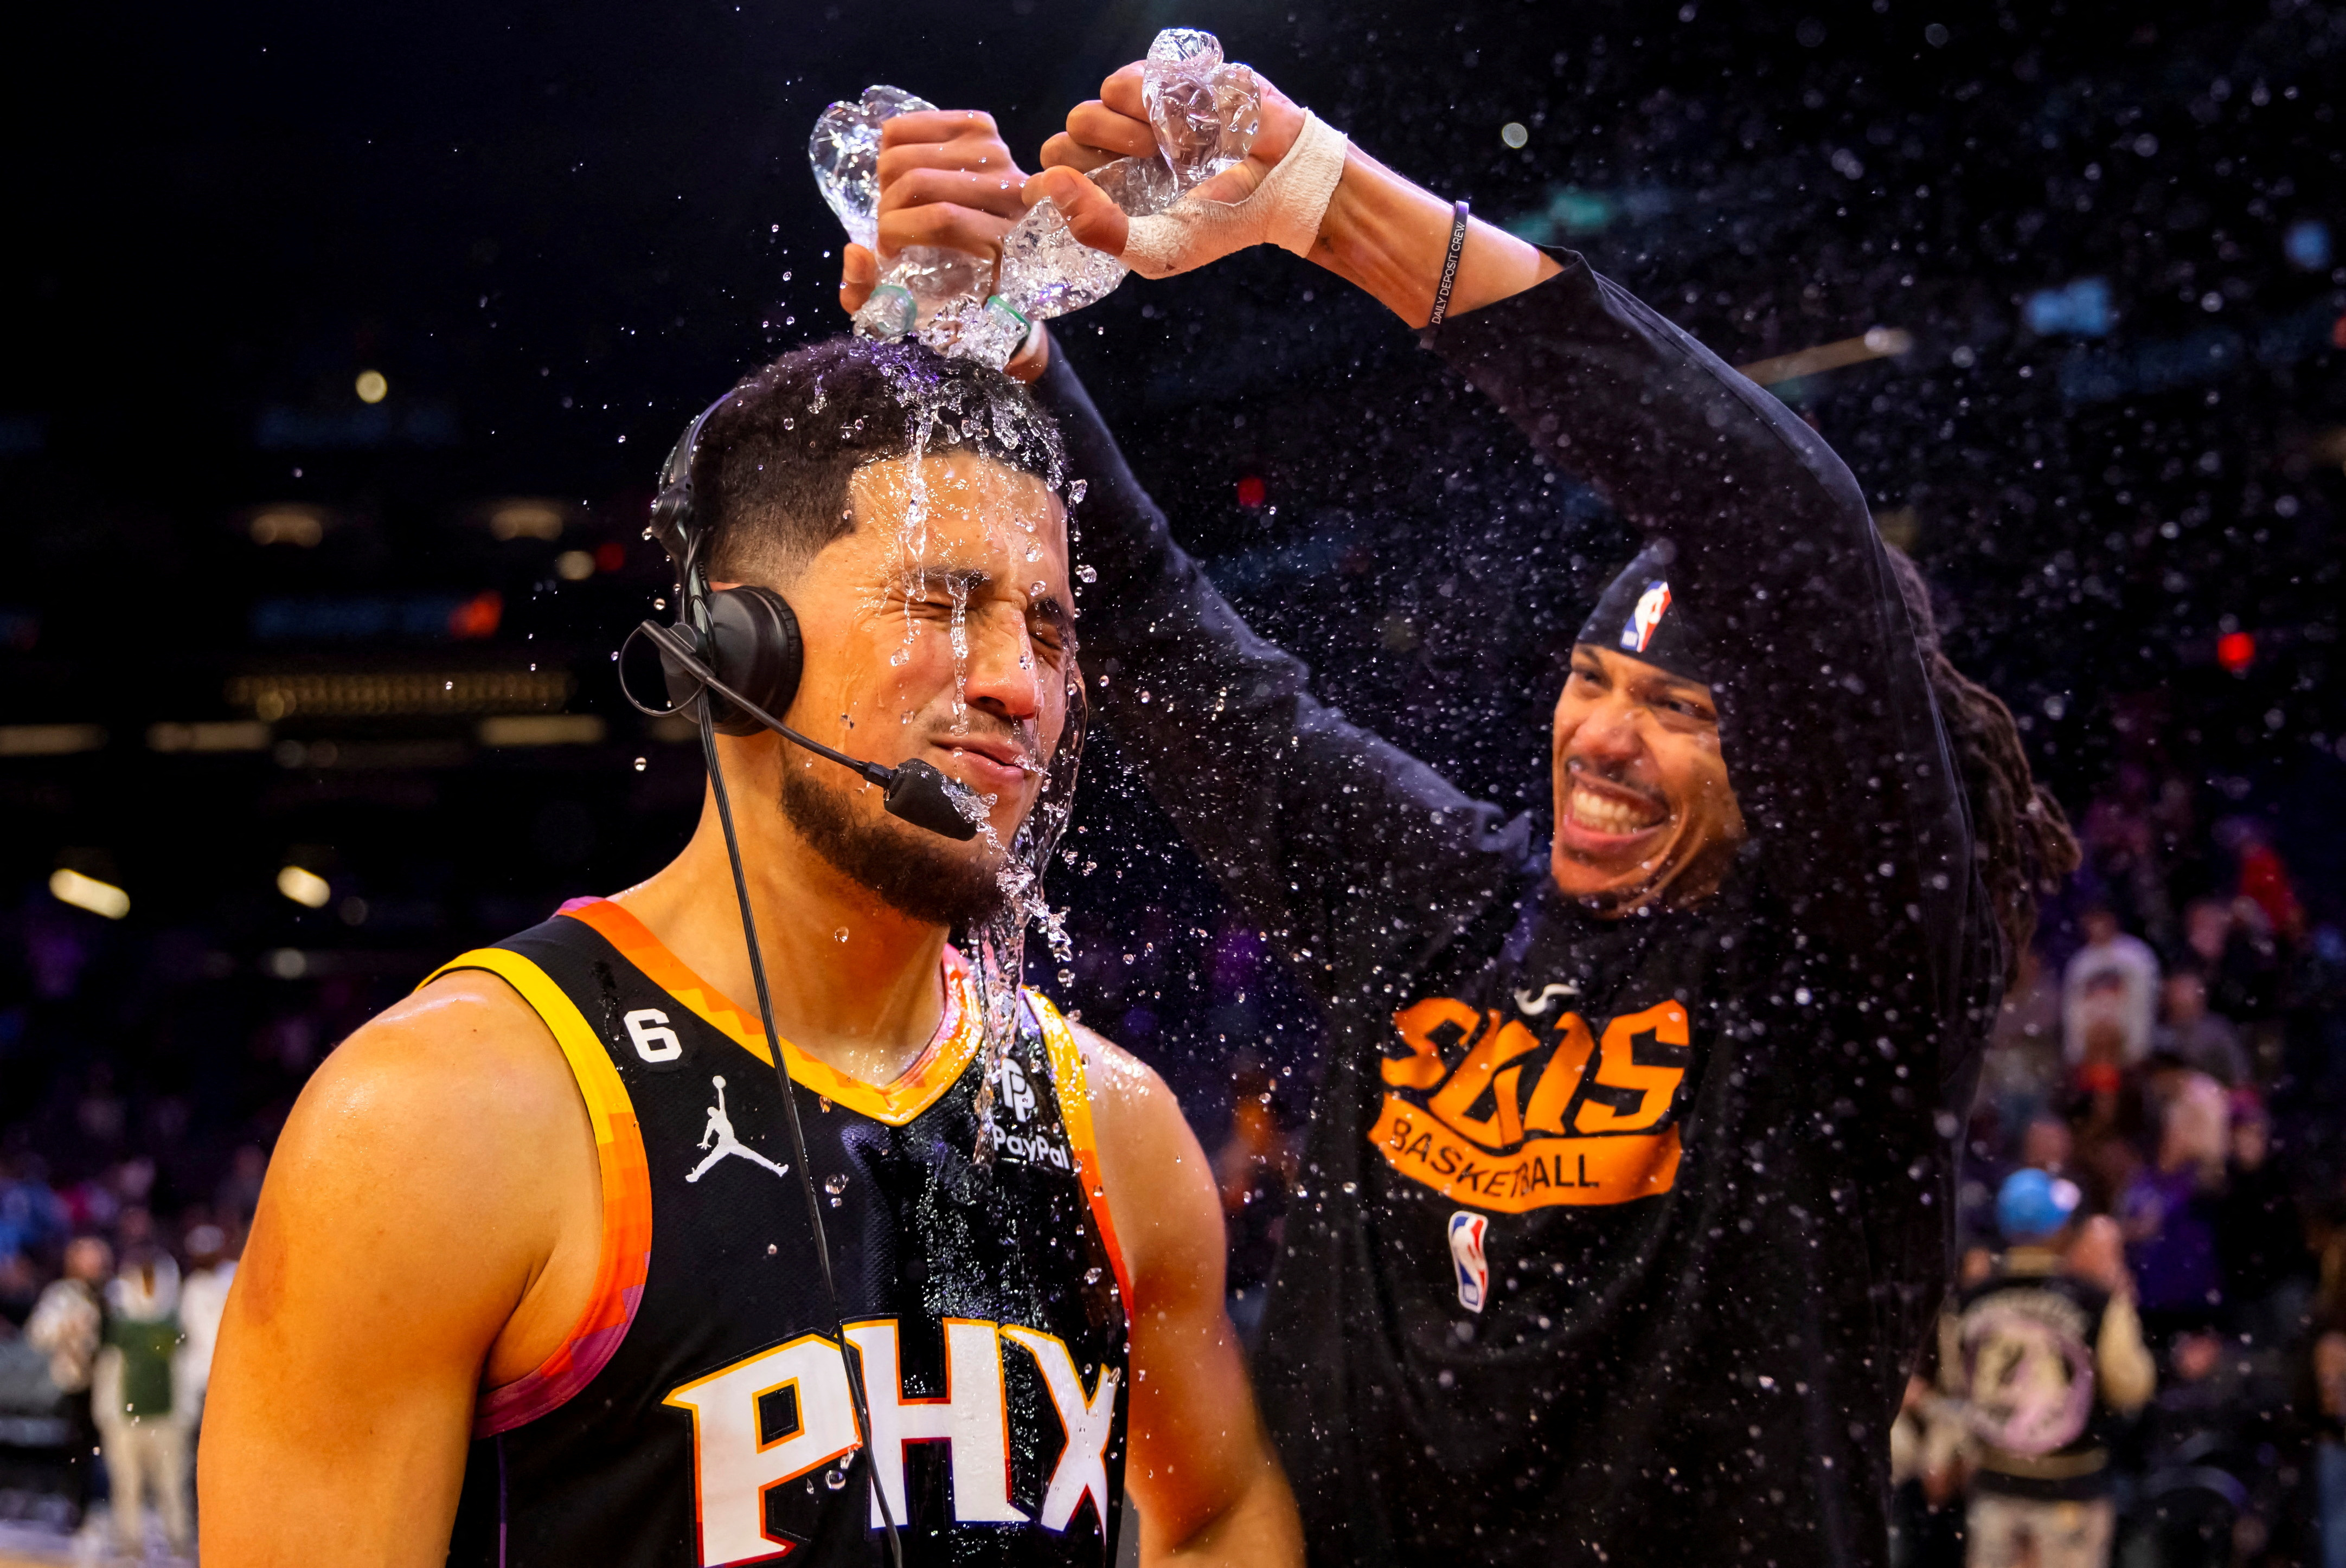 Press Release: Phoenix Suns and PayPal Extend Partnership